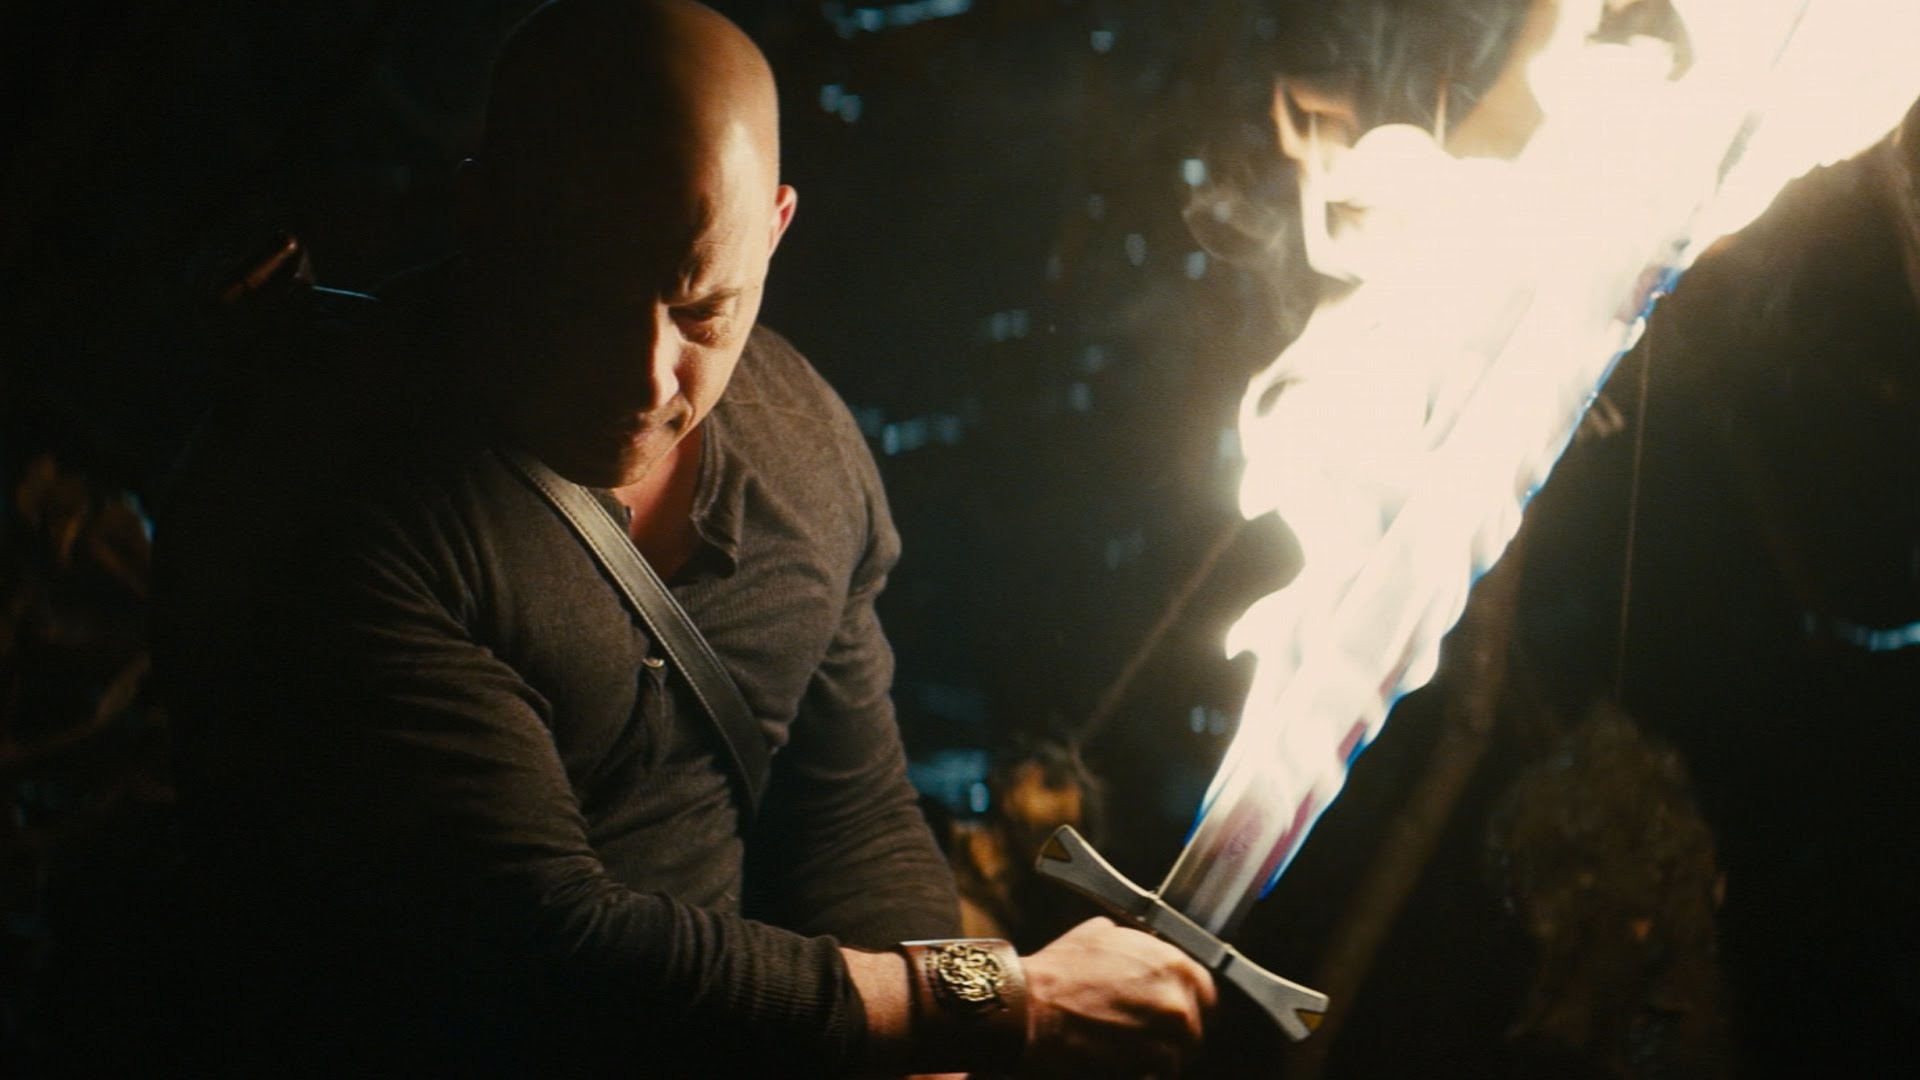 1920x1080 Vin, Diesel, Stars, In, The, Last, Witch, Hunter, High, Resolution,  Wallpaper, Download, Images, Download Wallpapers, Widescreen, Amazing  Pictures, ...